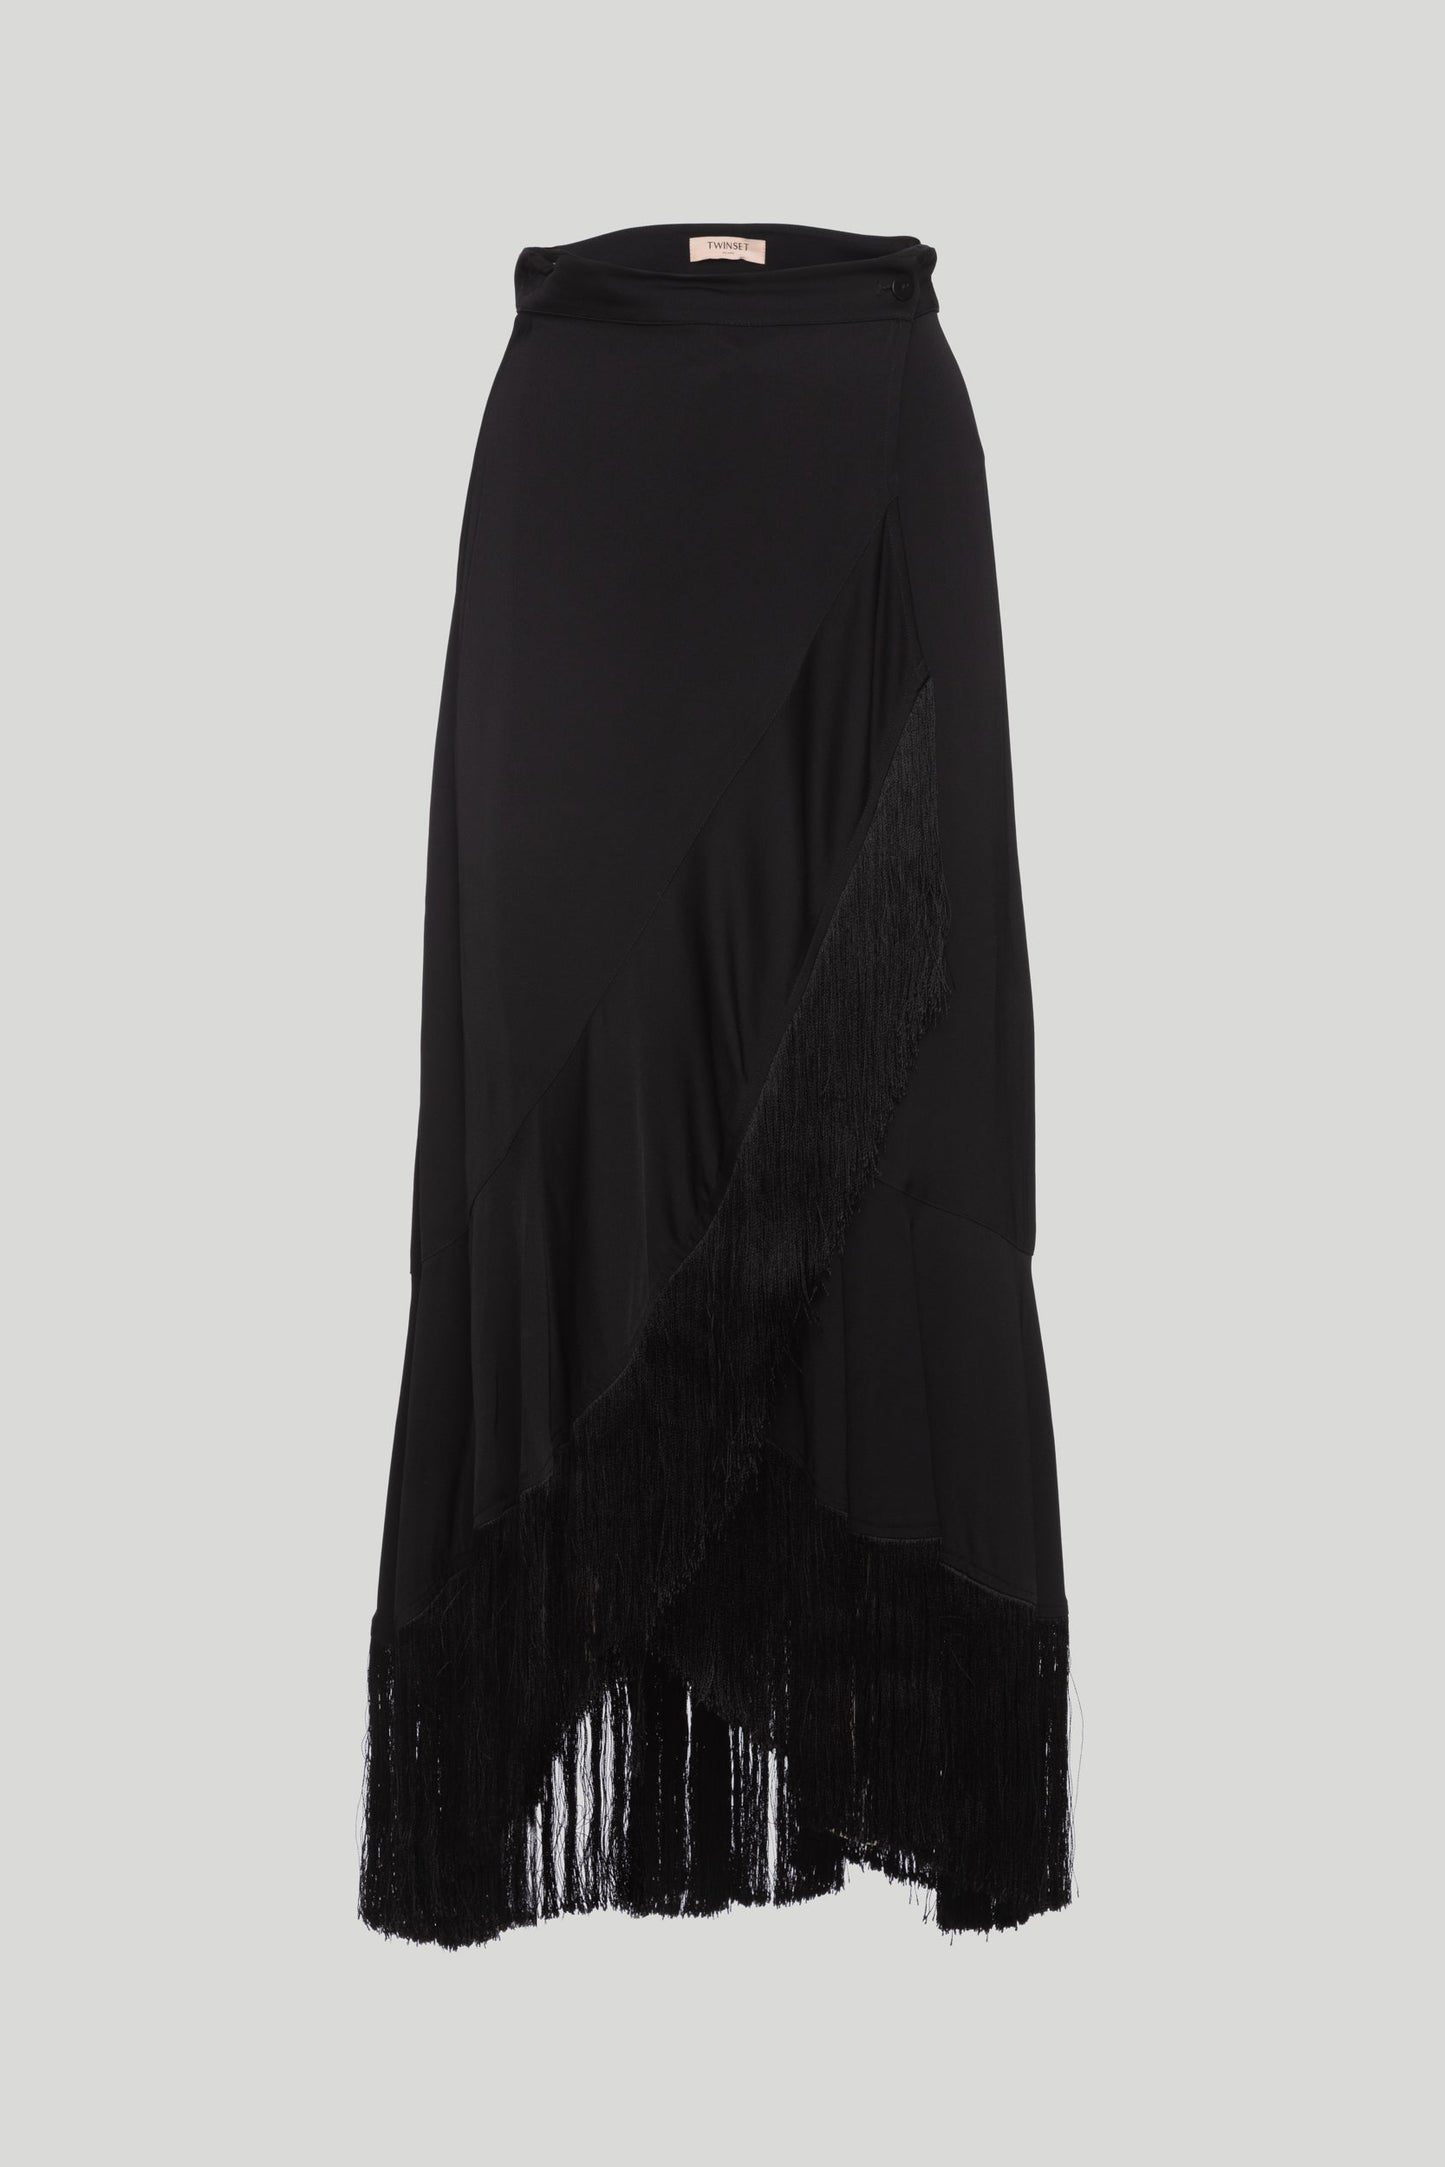 TWINSET Long Black Skirt and Fringes